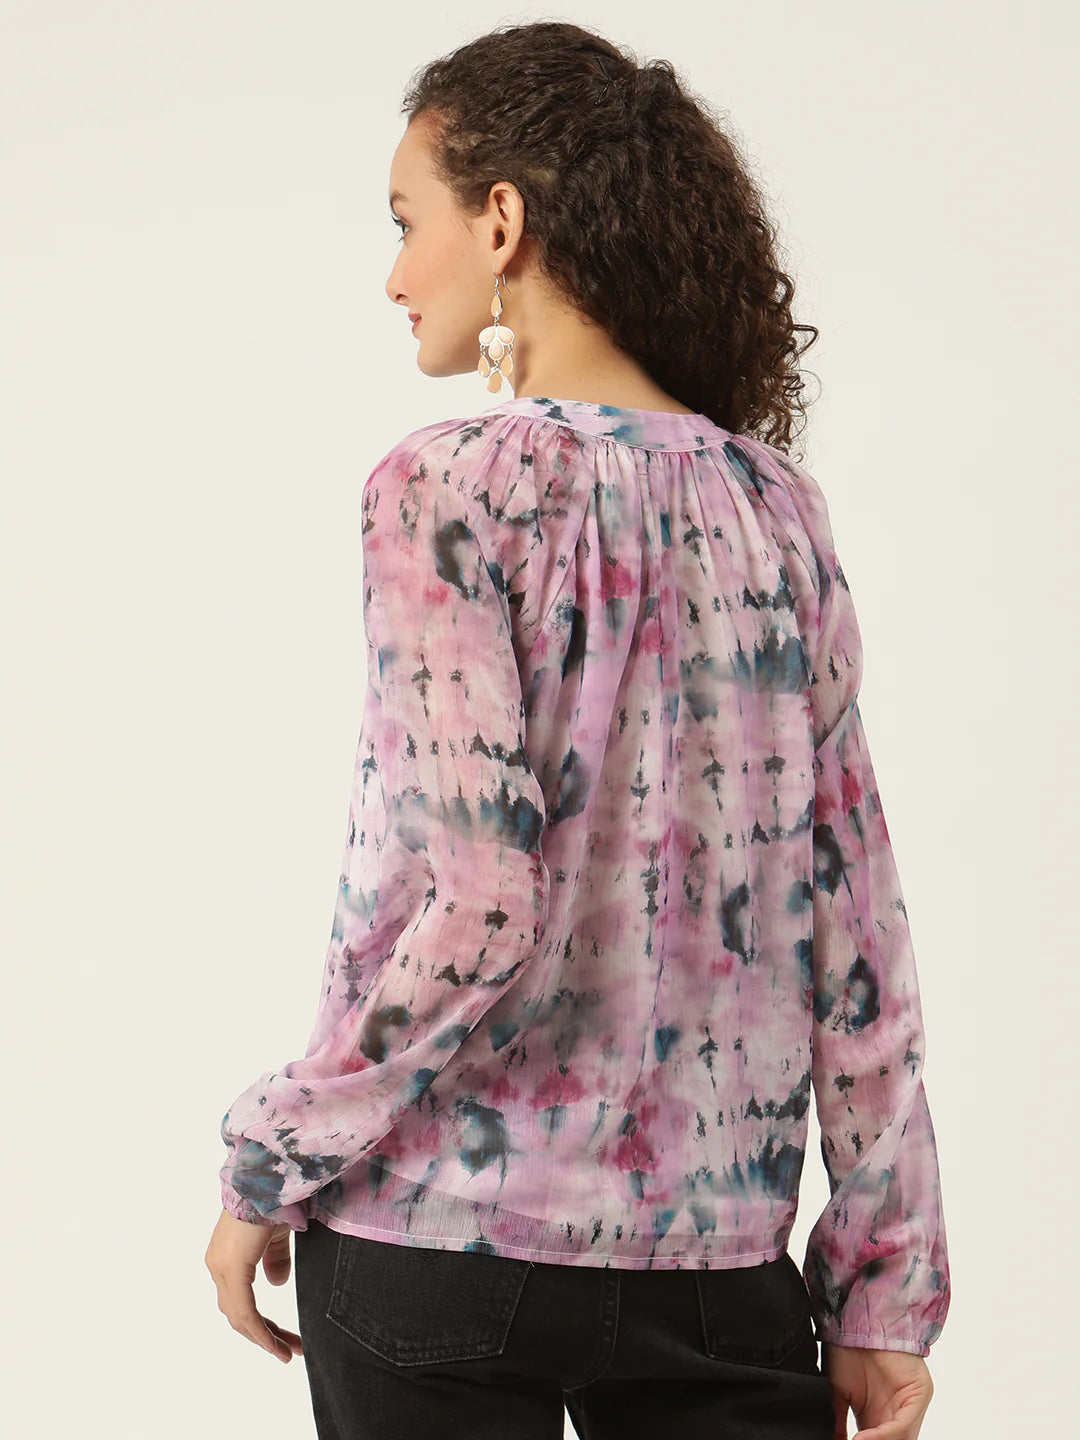 Printed Casual Shirt for Women | Chic Tie-Dye Harmony Top